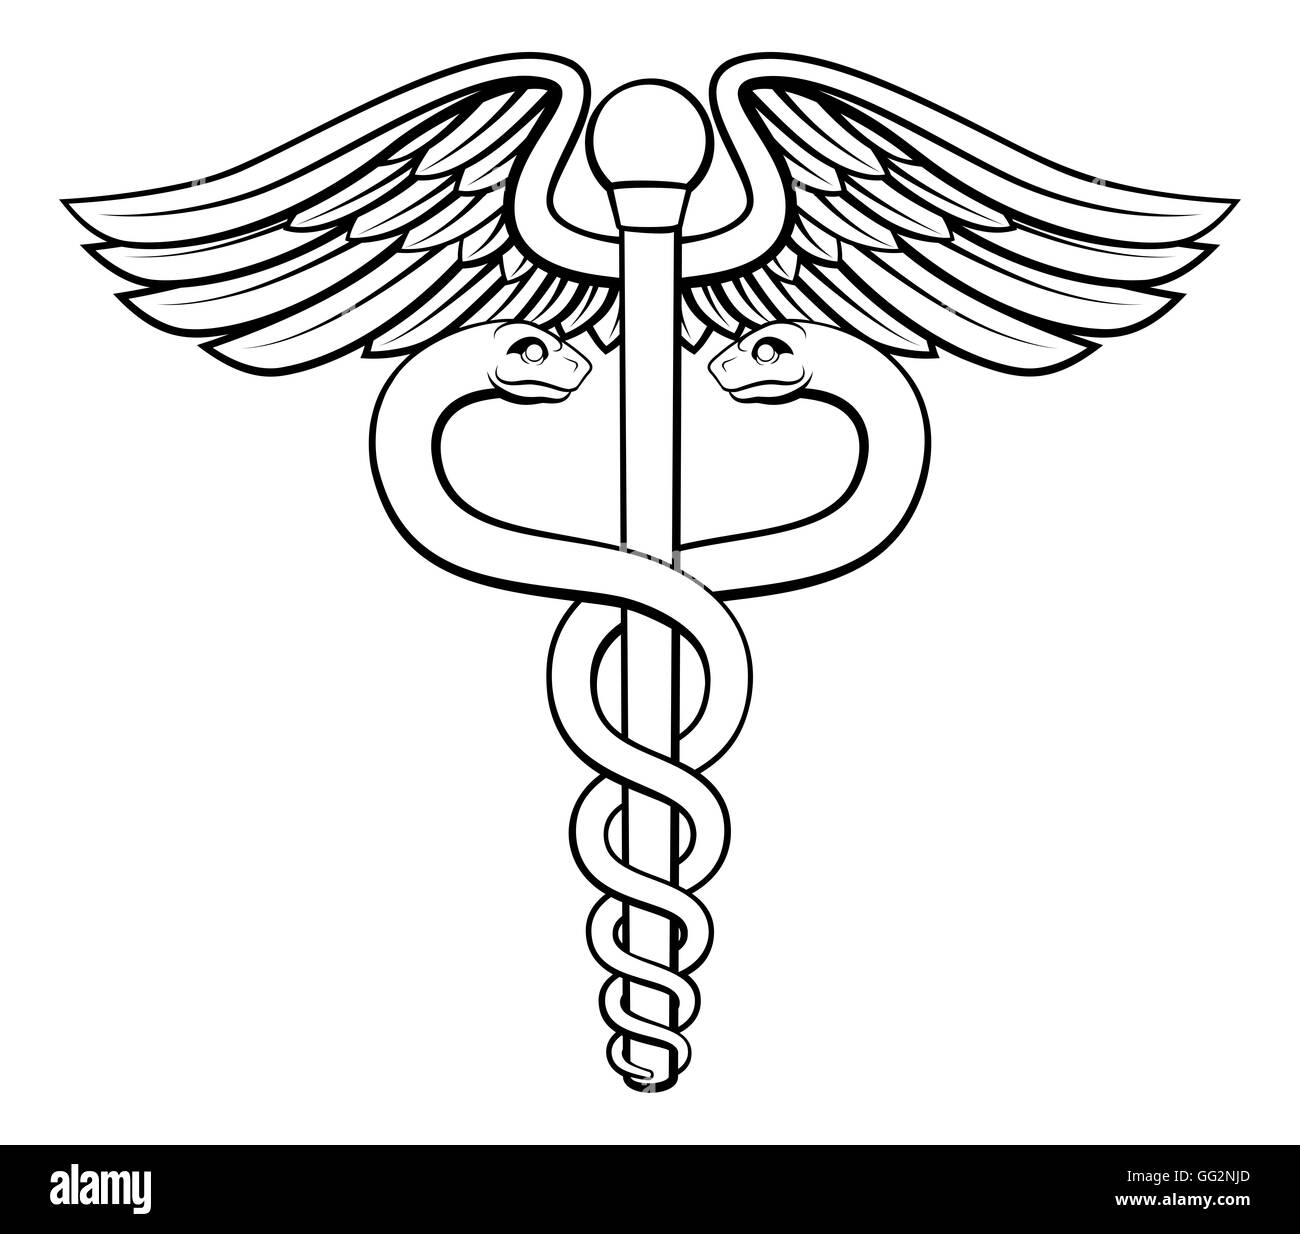 An illustration of the caduceus symbol of two snakes intertwined around a winged rod. Associated with healing and medicine. Stock Photo